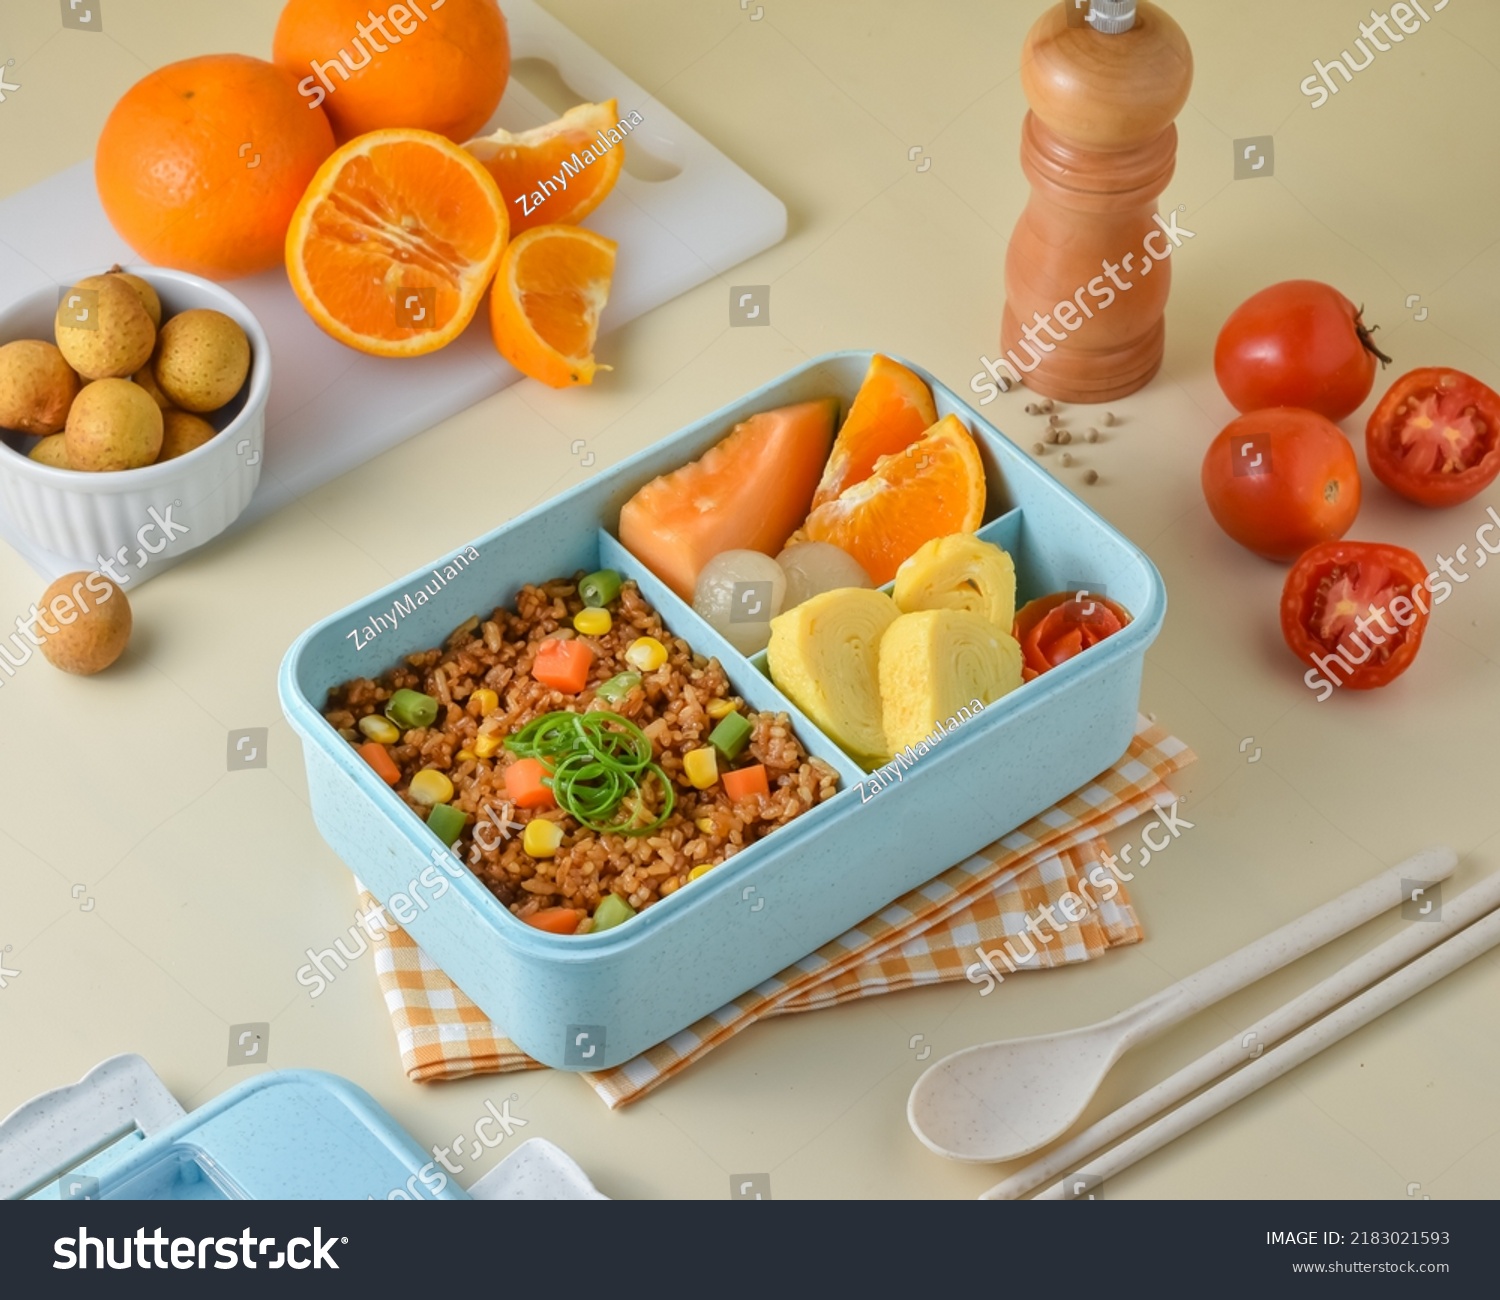 Prepare Children's School Supplies in the lunch box, with ingredients vegetables fried rice, tamagoyaki or omelet, orange, melon, and longan.  #2183021593